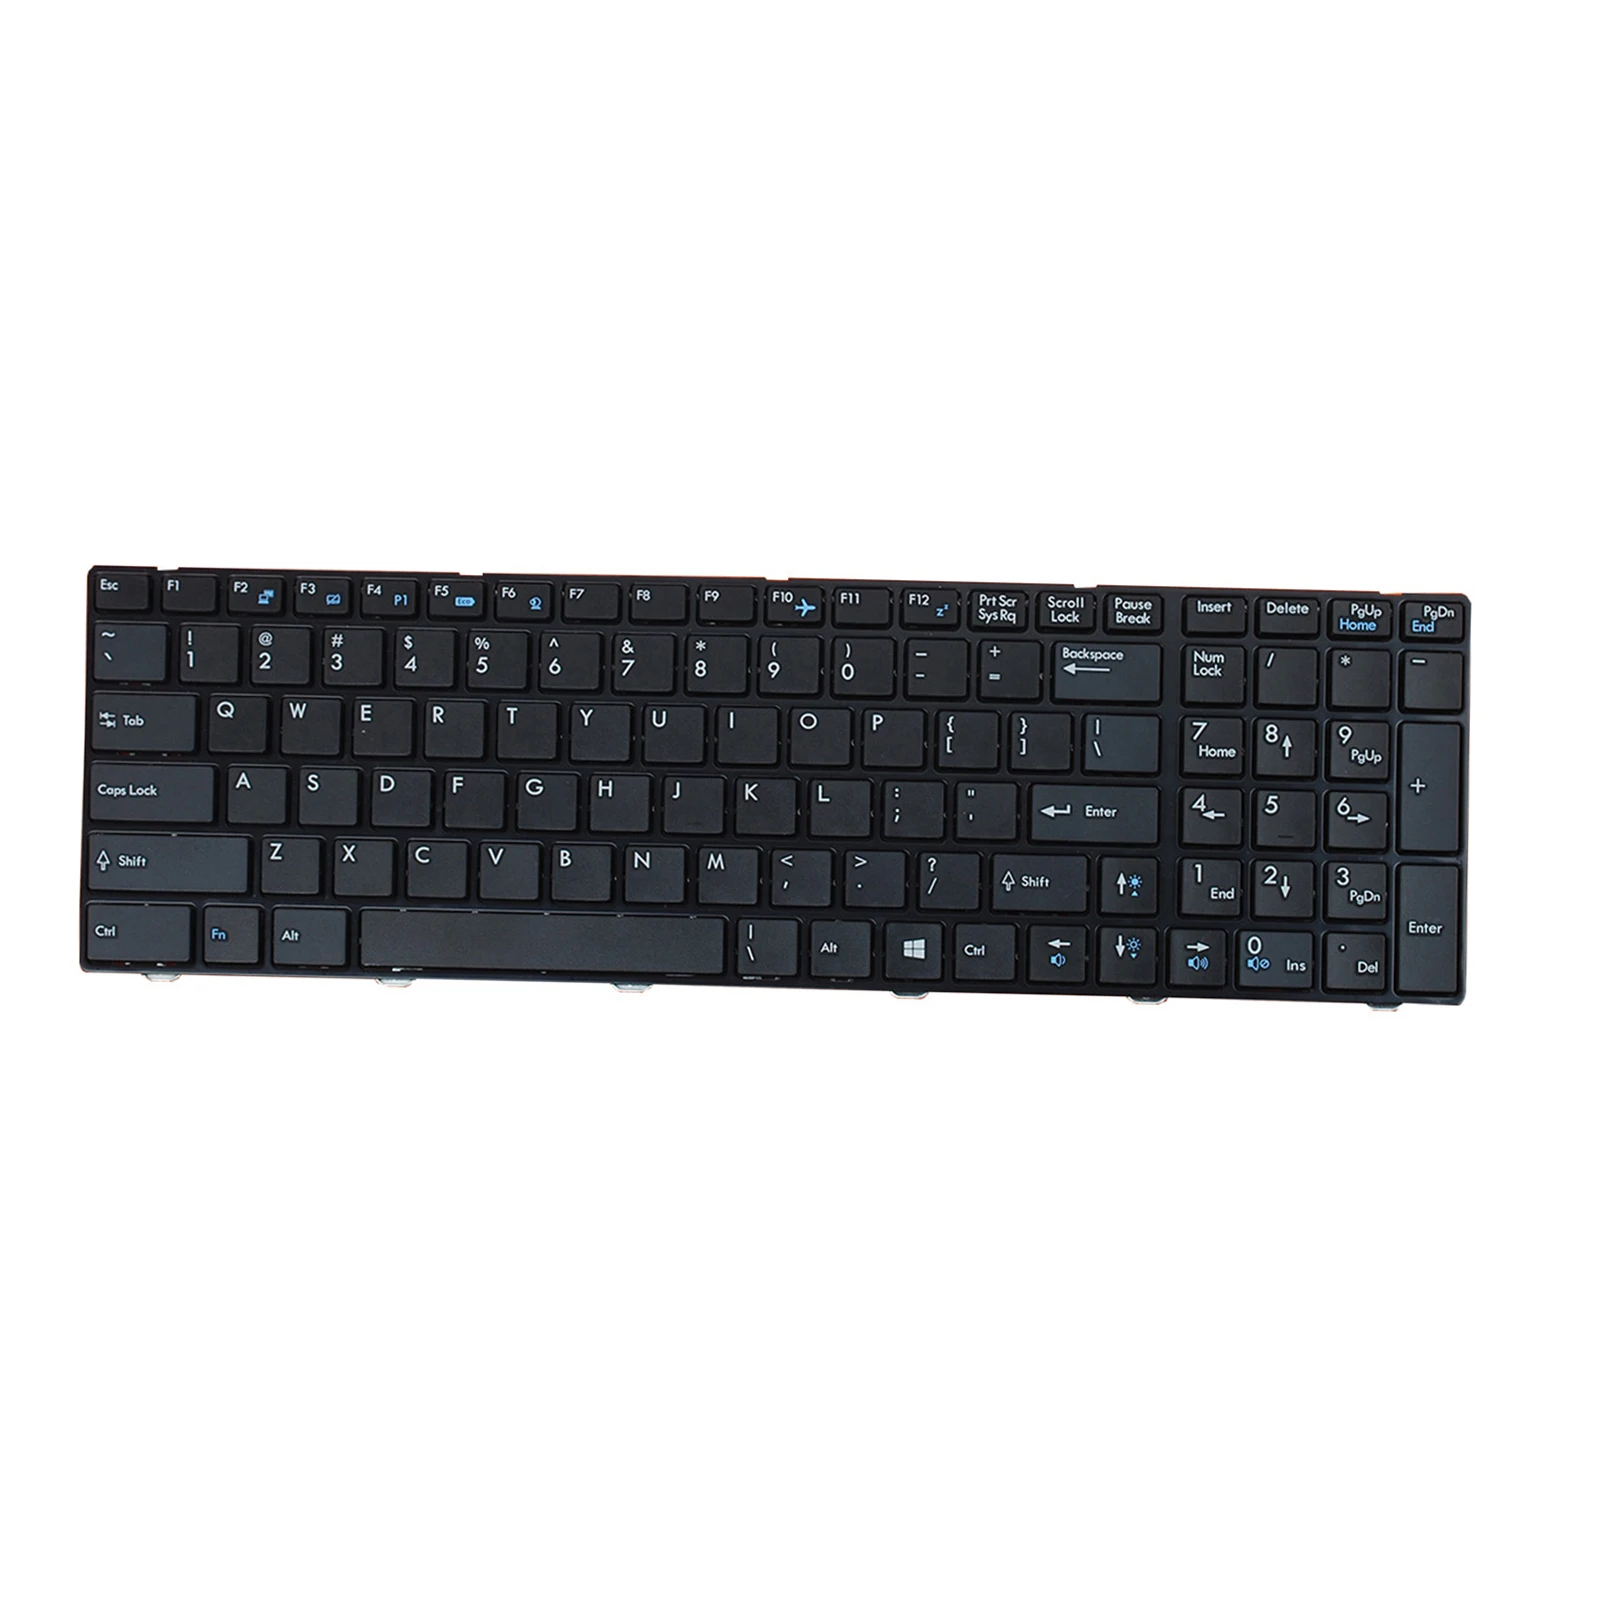 V139922CK1 English Laptop Keyboard Fits for MSI GE60 GE70 GP60 GP70 CR61 CR70 US Layout Laptop Accessories